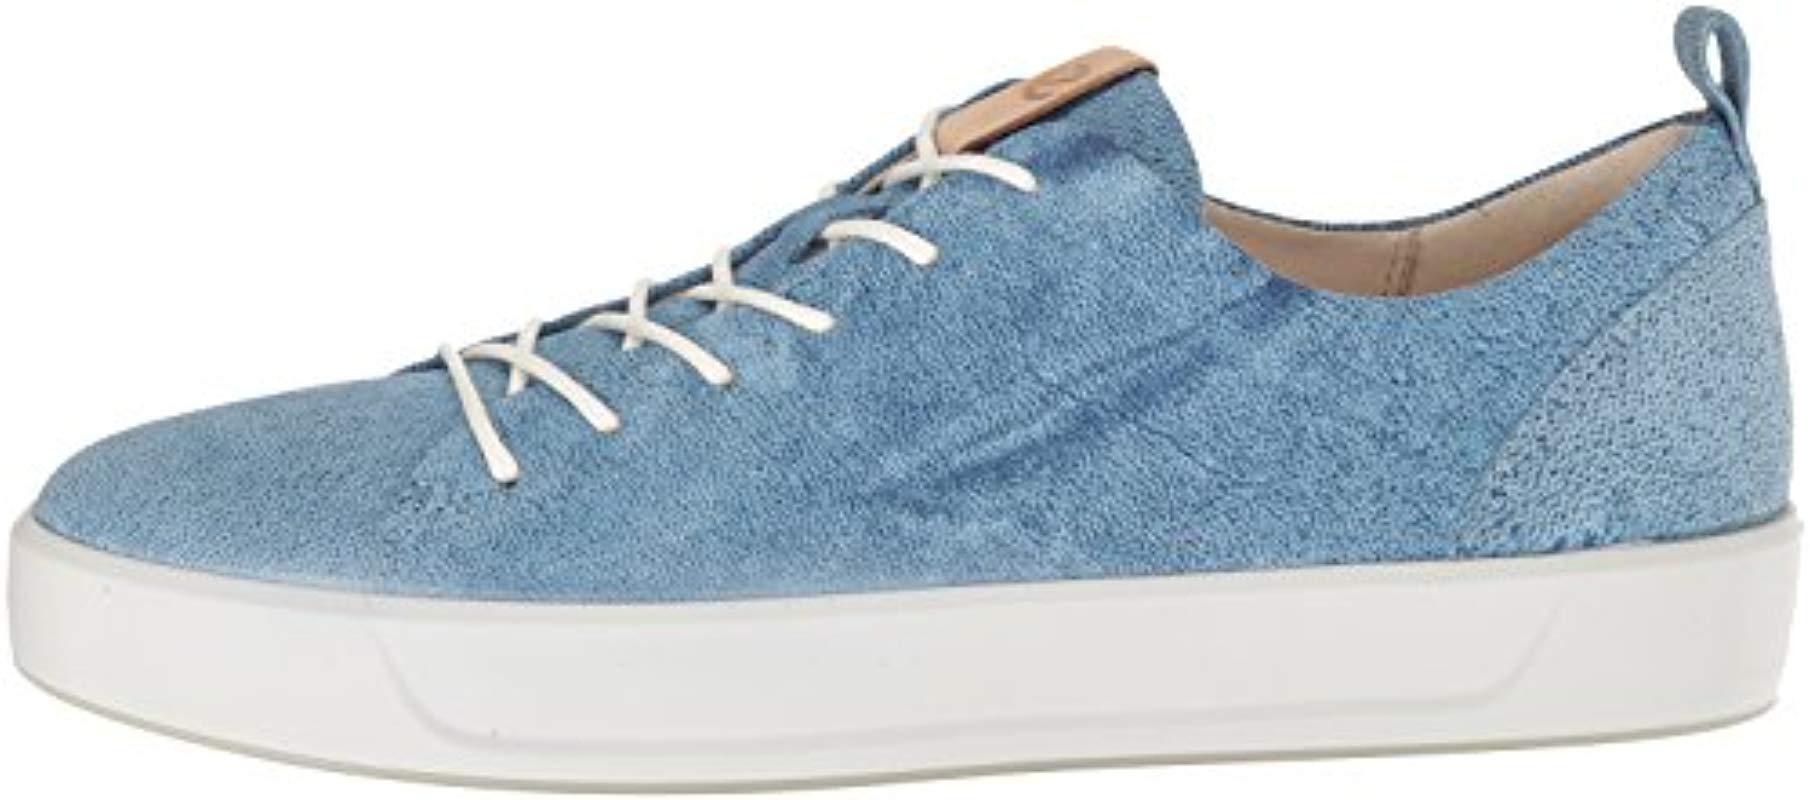 Ecco Leather Soft 8 Trainers in Indigo/White (Blue) - Save 58% | Lyst